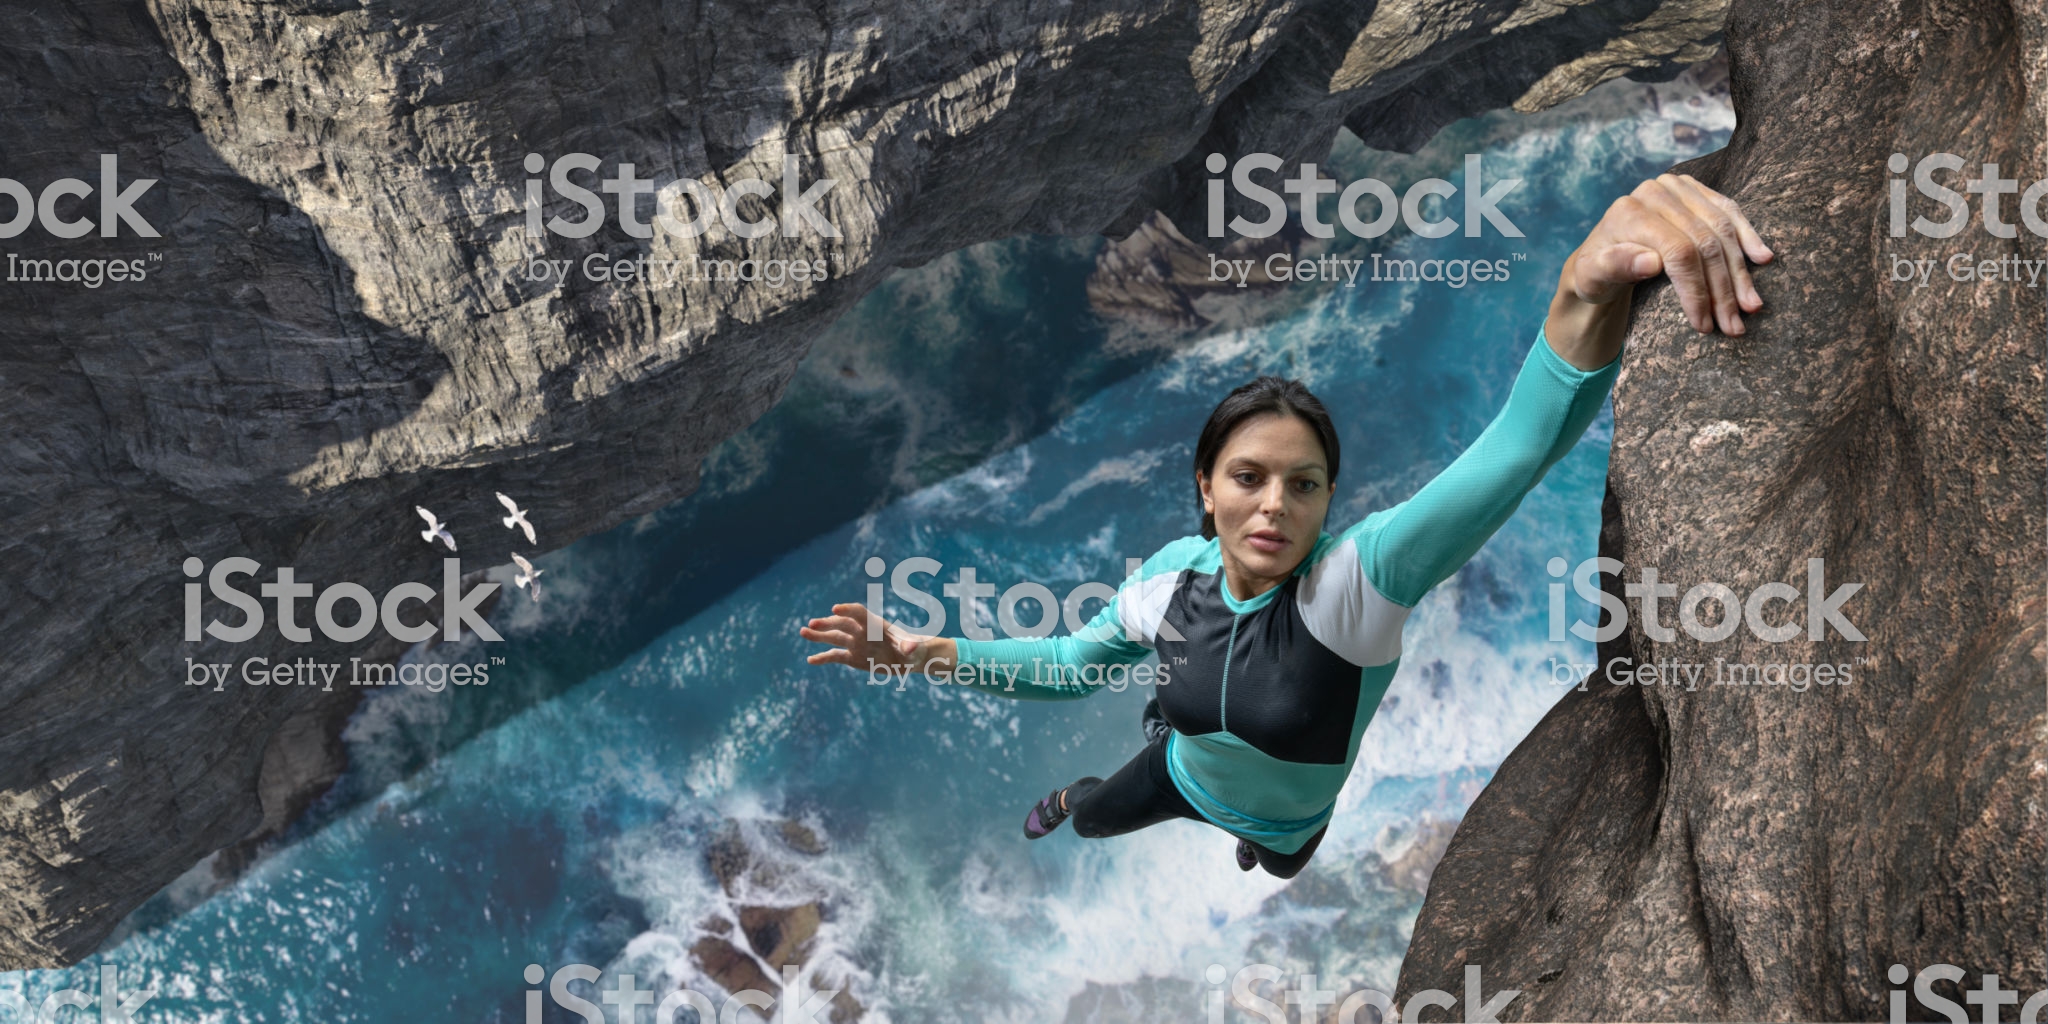 A young woman extreme free climbing without safety equipment, hangs one handed from a rock face over the sea and rocks below. The climber is wearing climbing top, leggings. chalk bag and climbing shoes. Waves break over rocks in the sea below during sunny daylight in clear weather.